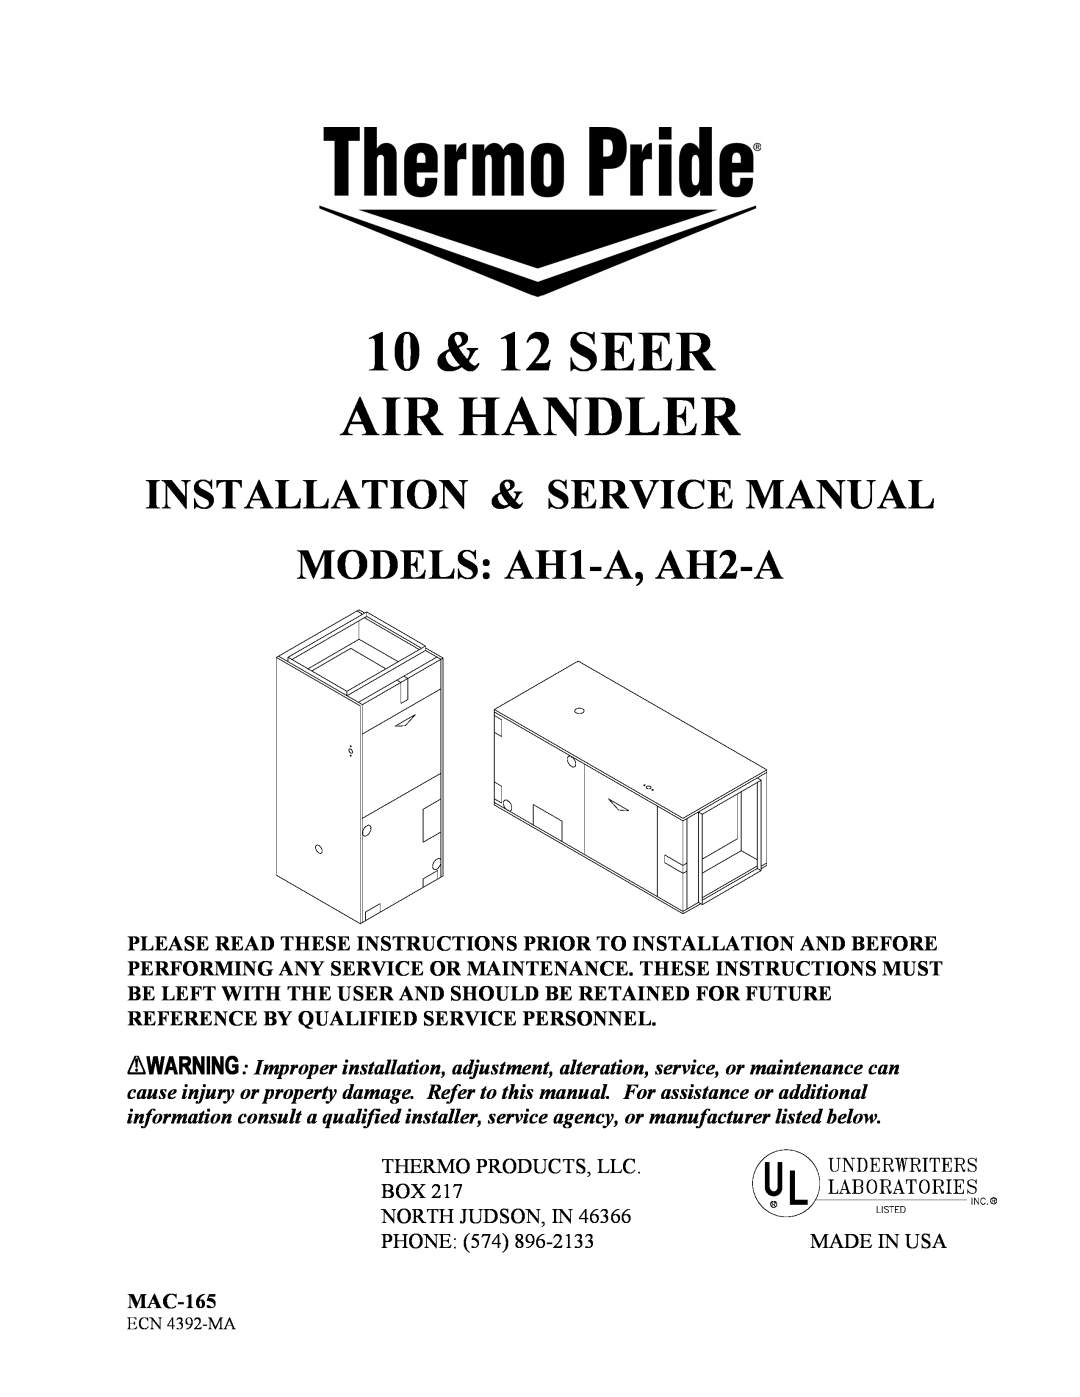 Thermo Products service manual 10 & 12 SEER AIR HANDLER, INSTALLATION & SERVICE MANUAL MODELS AH1-A, AH2-A 